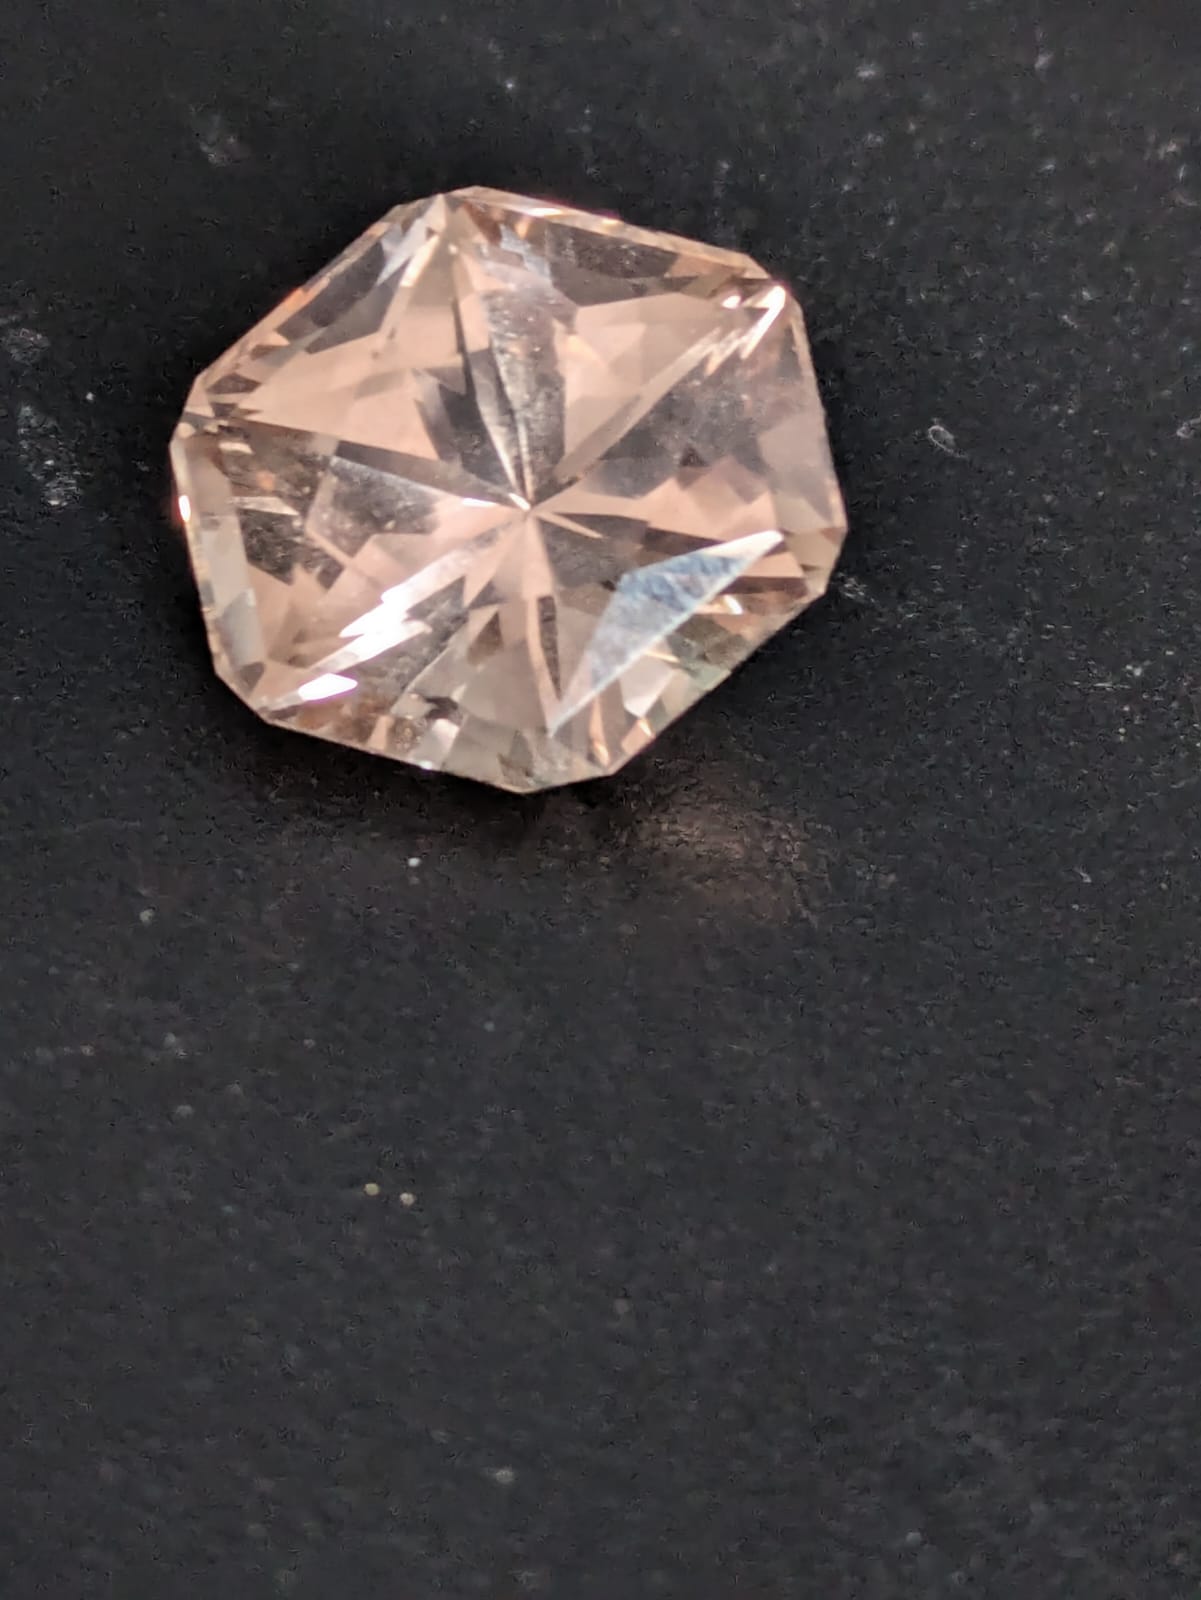 Imperial Topaz - Image 11 of 14